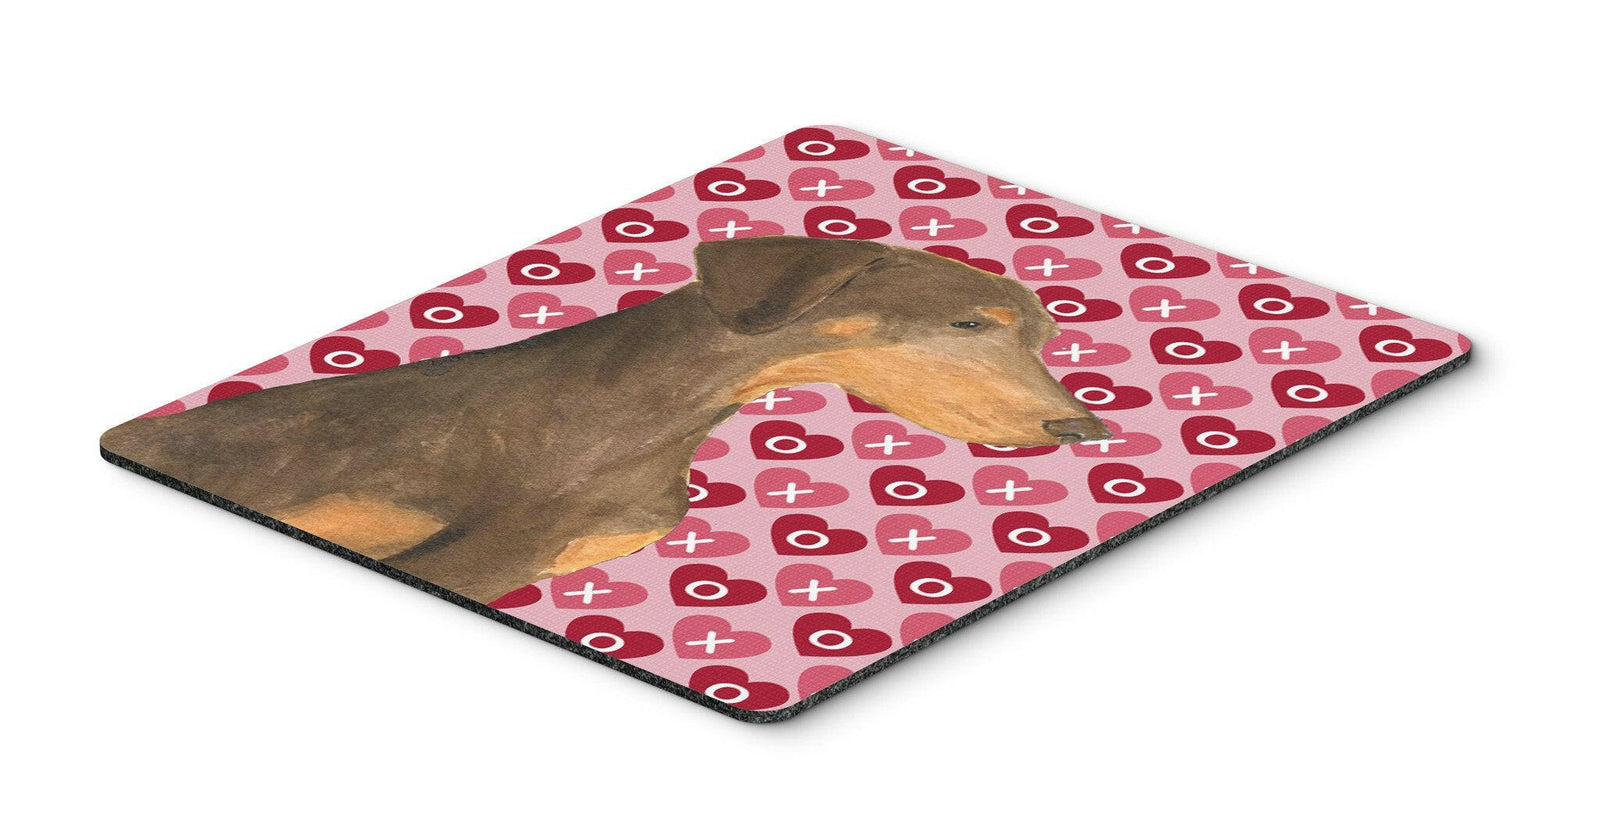 Doberman Hearts Love and Valentine's Day Portrait Mouse Pad, Hot Pad or Trivet by Caroline's Treasures